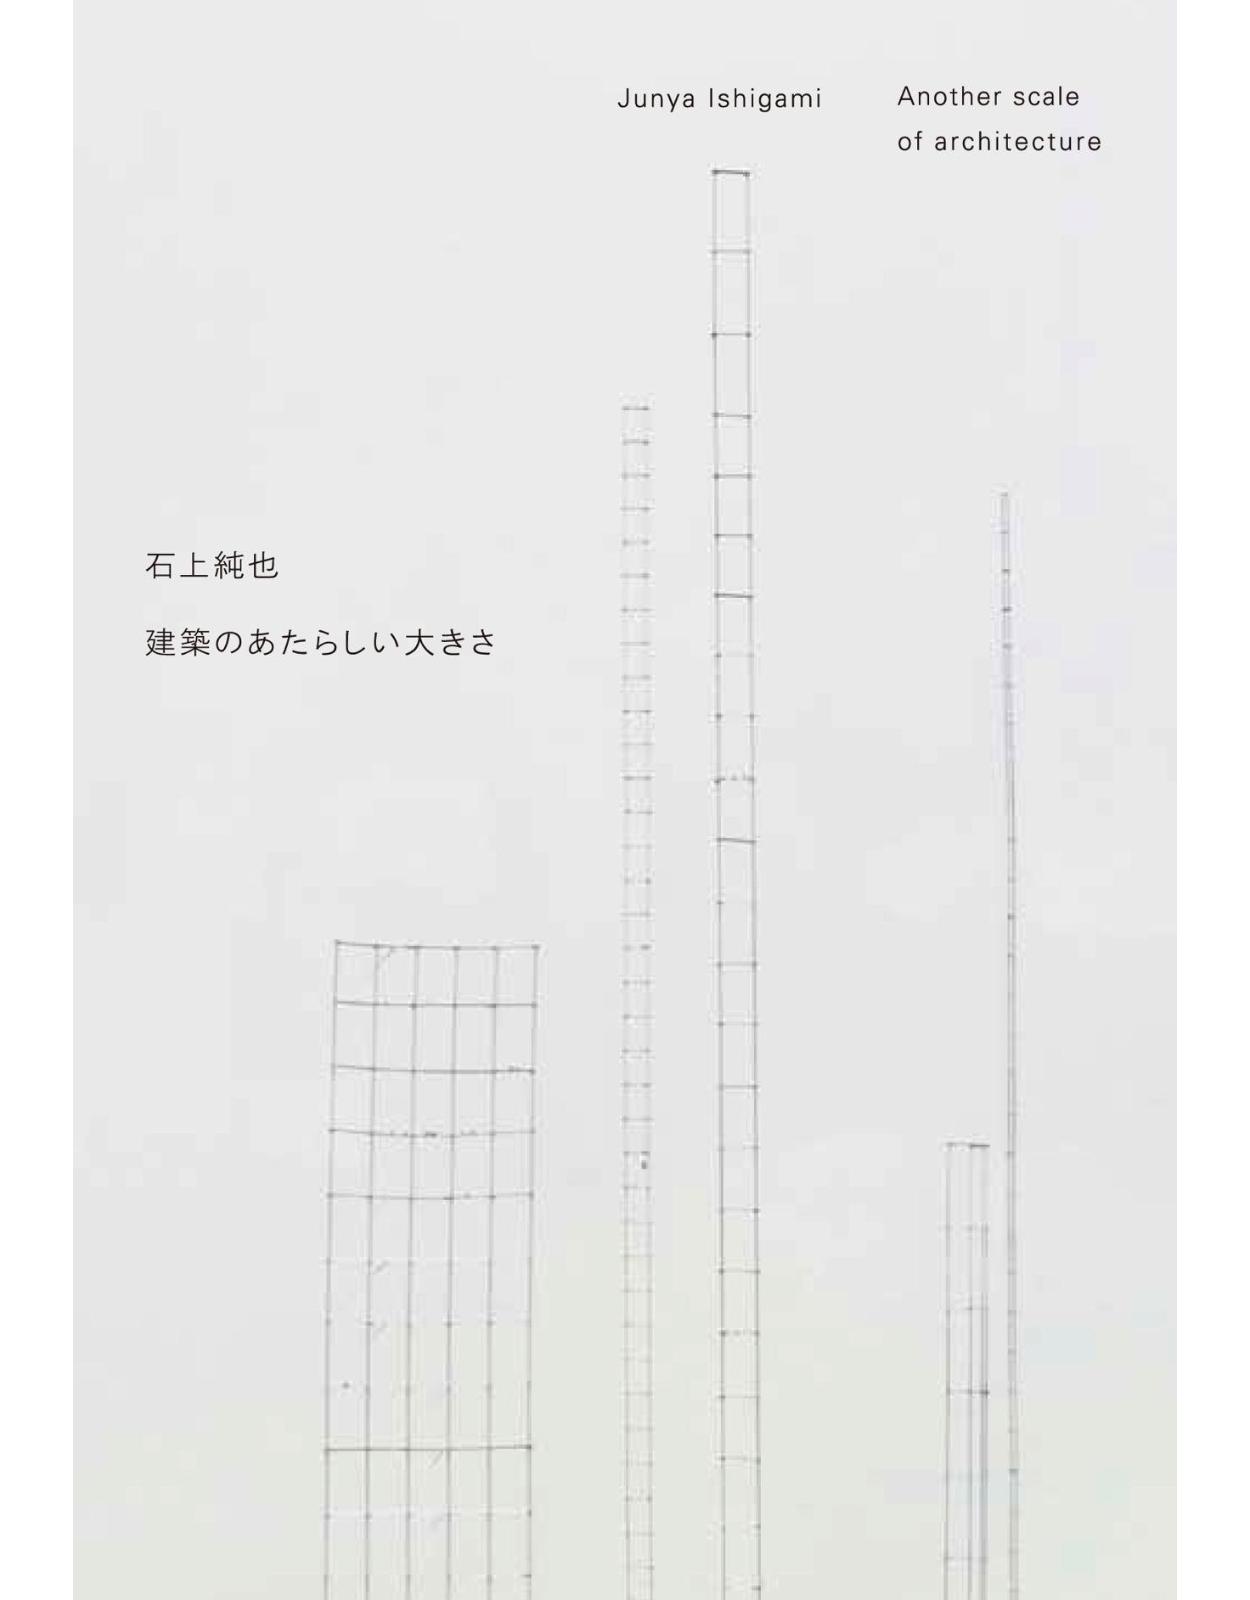 Junya Ishigami - Another Scale of Architecture